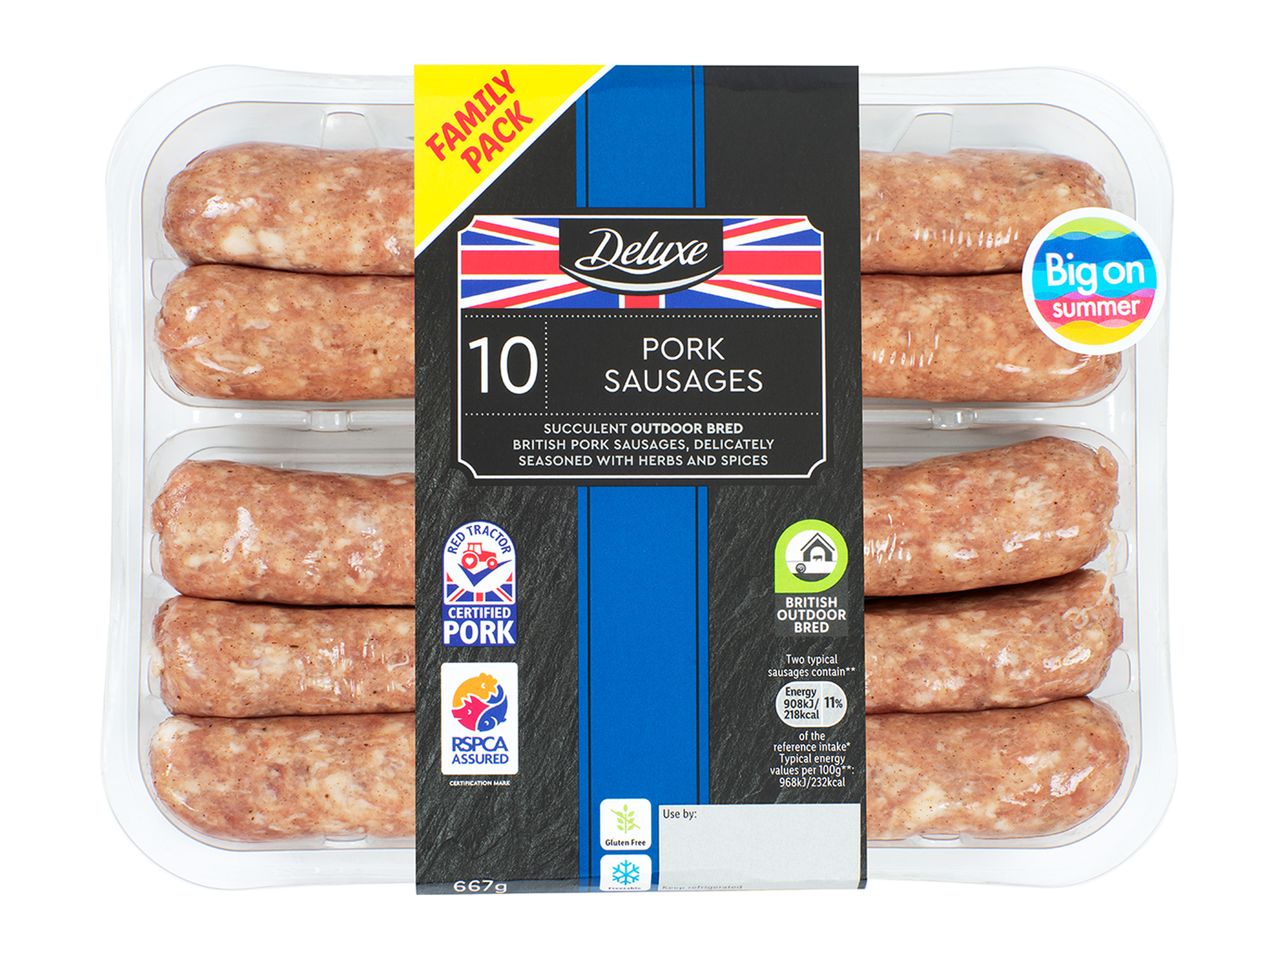 Go to full screen view: Deluxe RSPCA Pork Sausages - Image 1